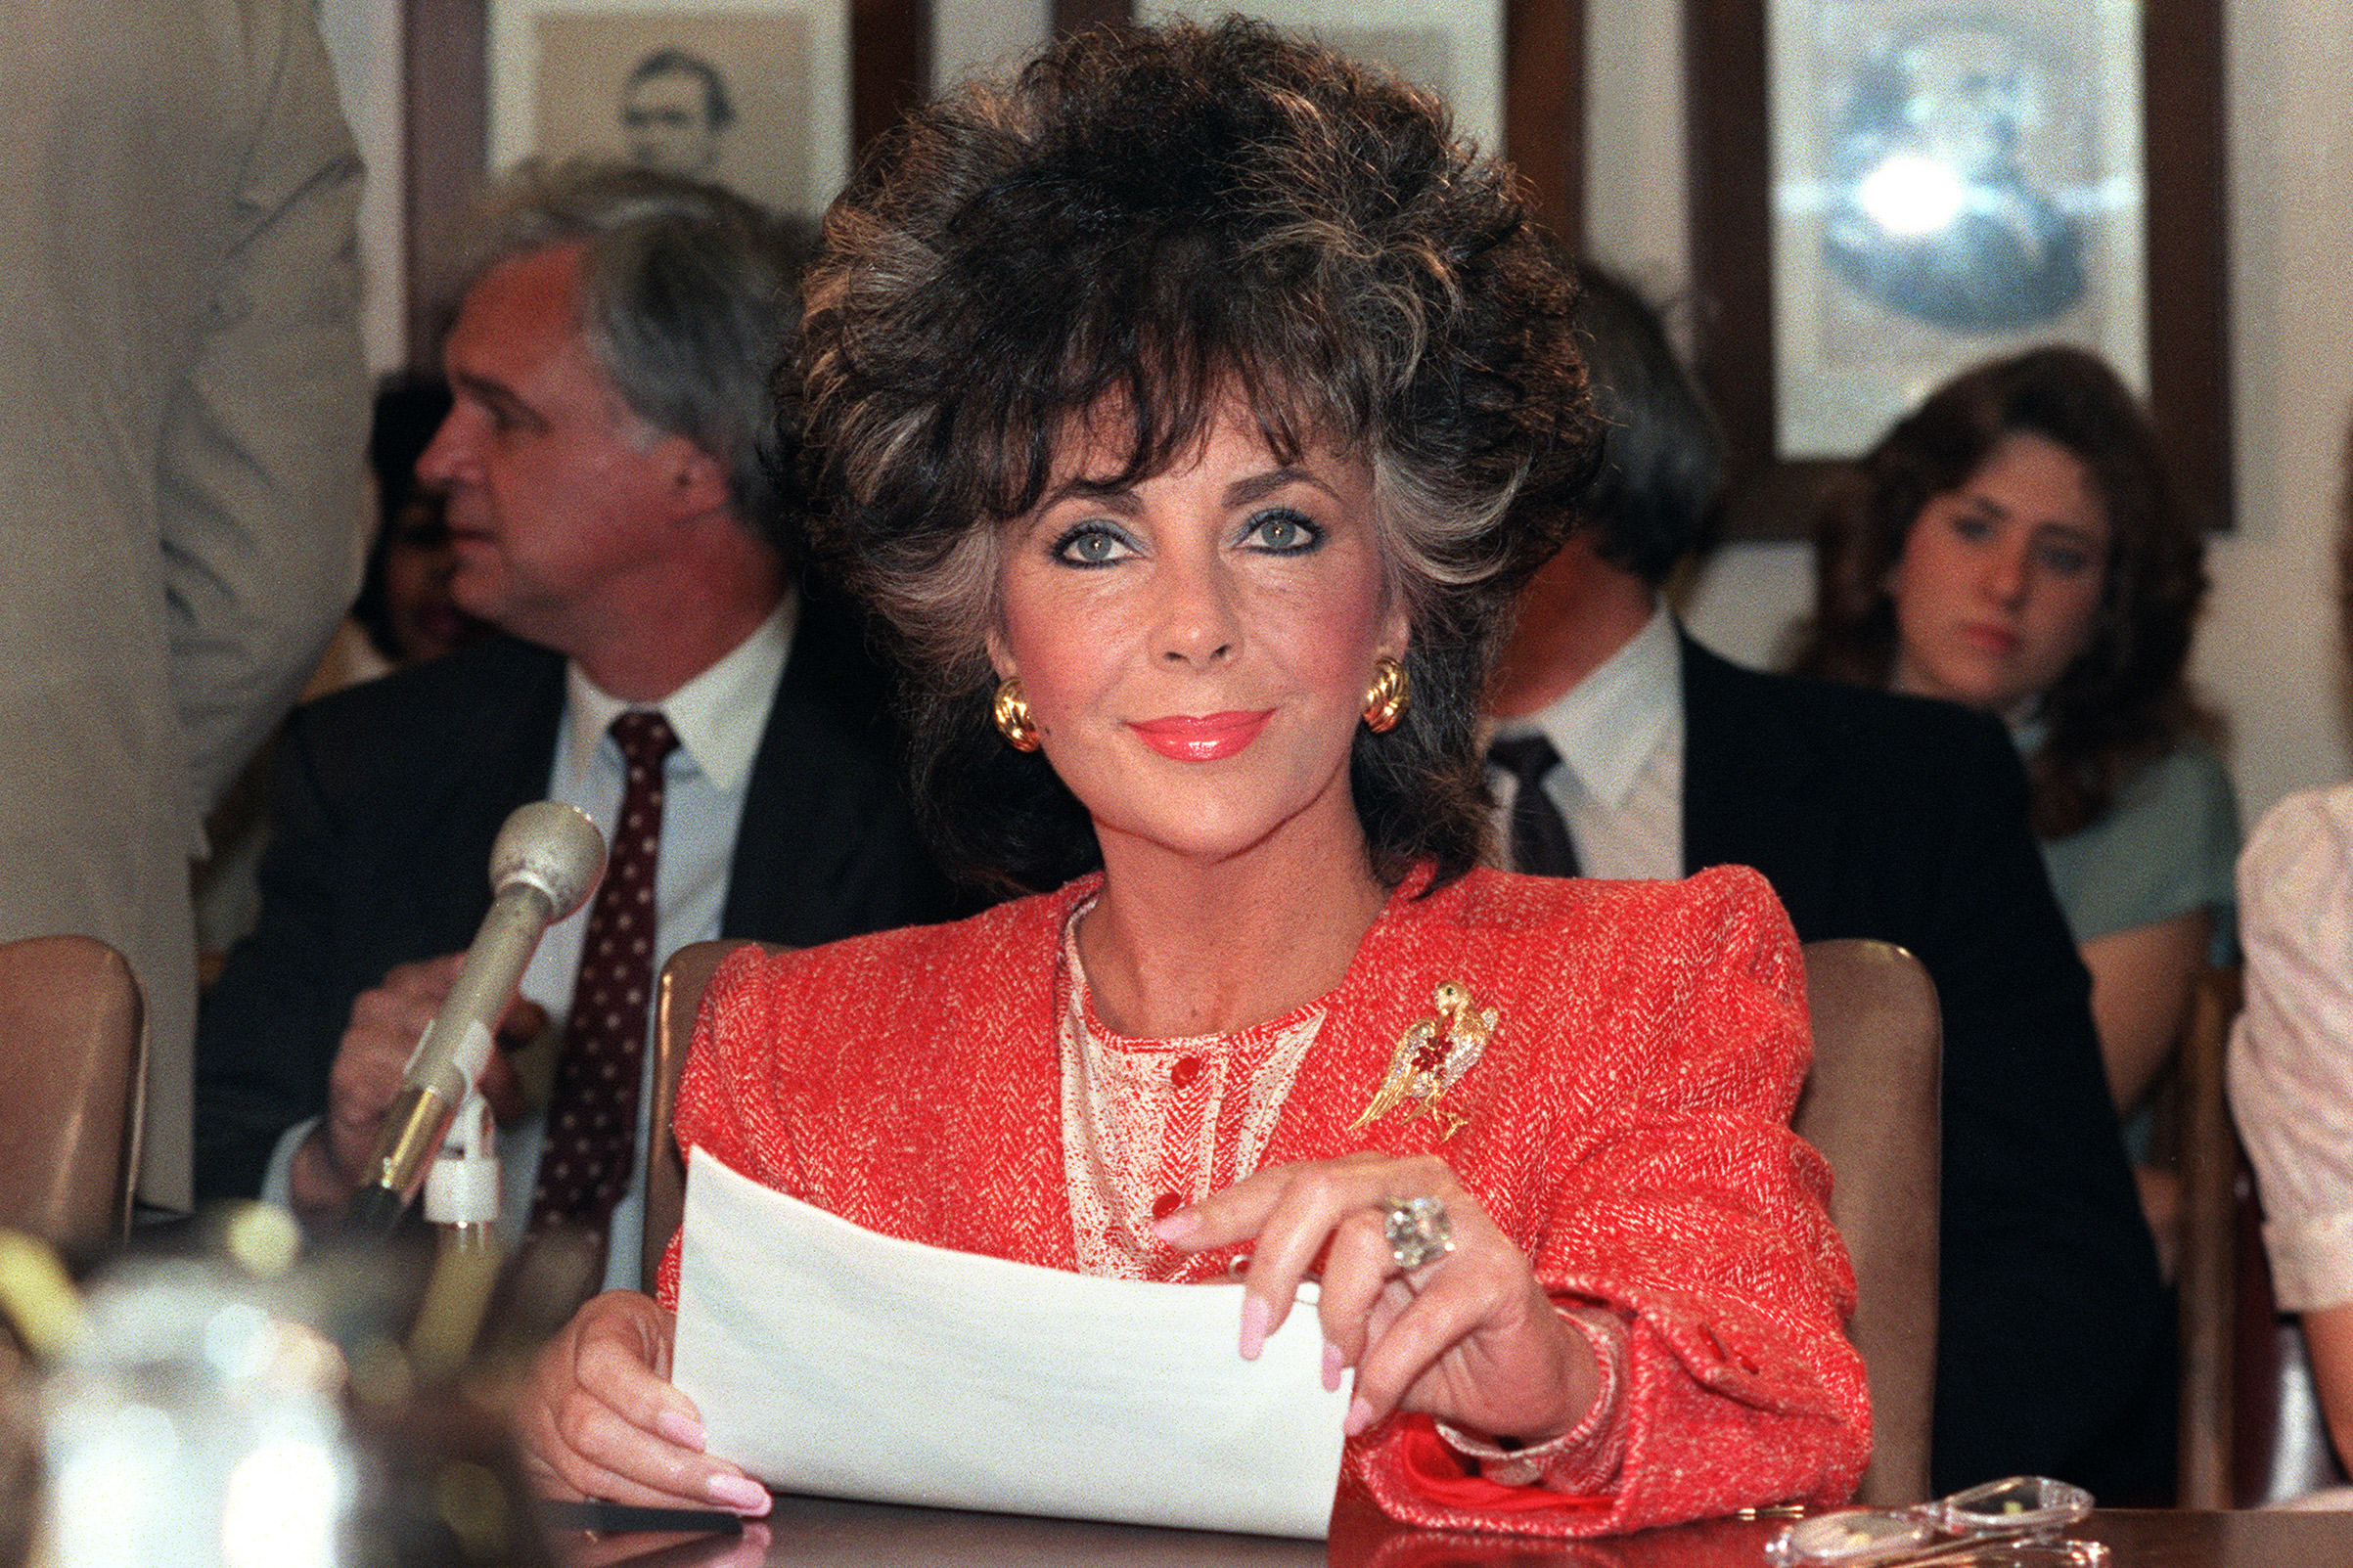 Elizabeth Taylor testifies before a Senate sub-committee on May 8, 1986 in Washington as chairman of the American Foundation for AIDS Research (amfAR). (Jerome Delay—AFP/Getty Images)